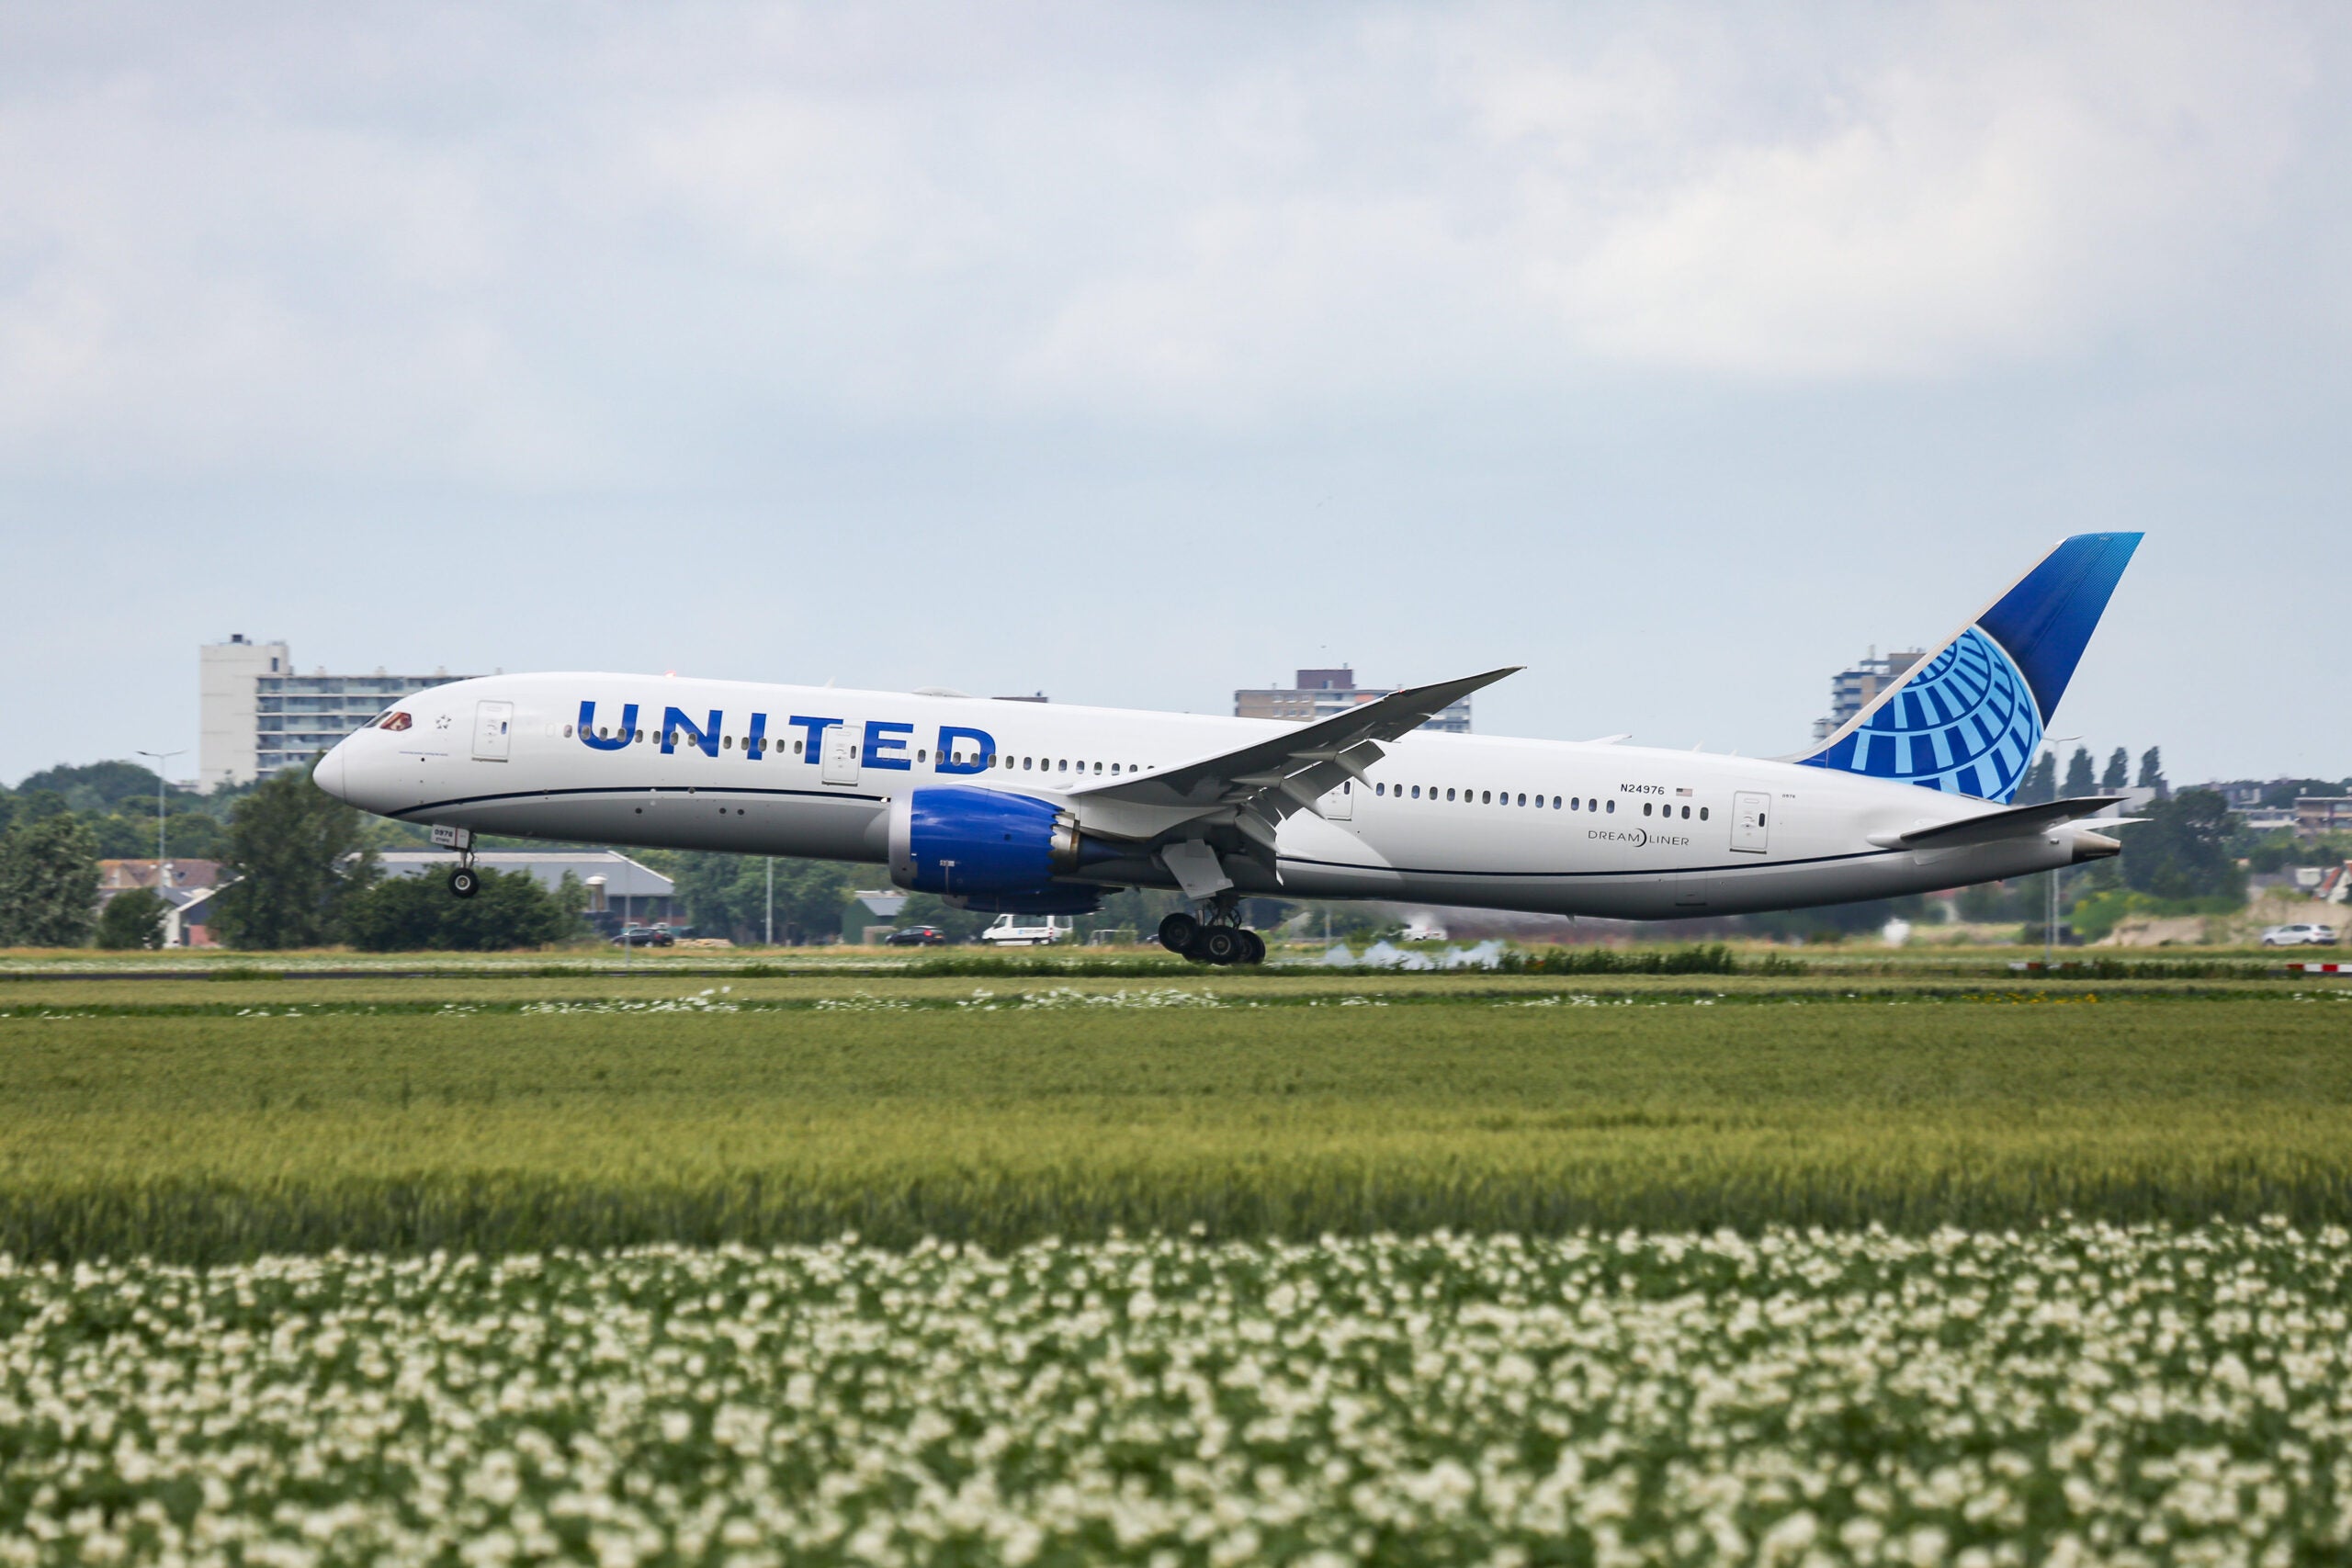 United Airlines orders up to 200 Boeing 787s, setting stage for widebody fleet renewal